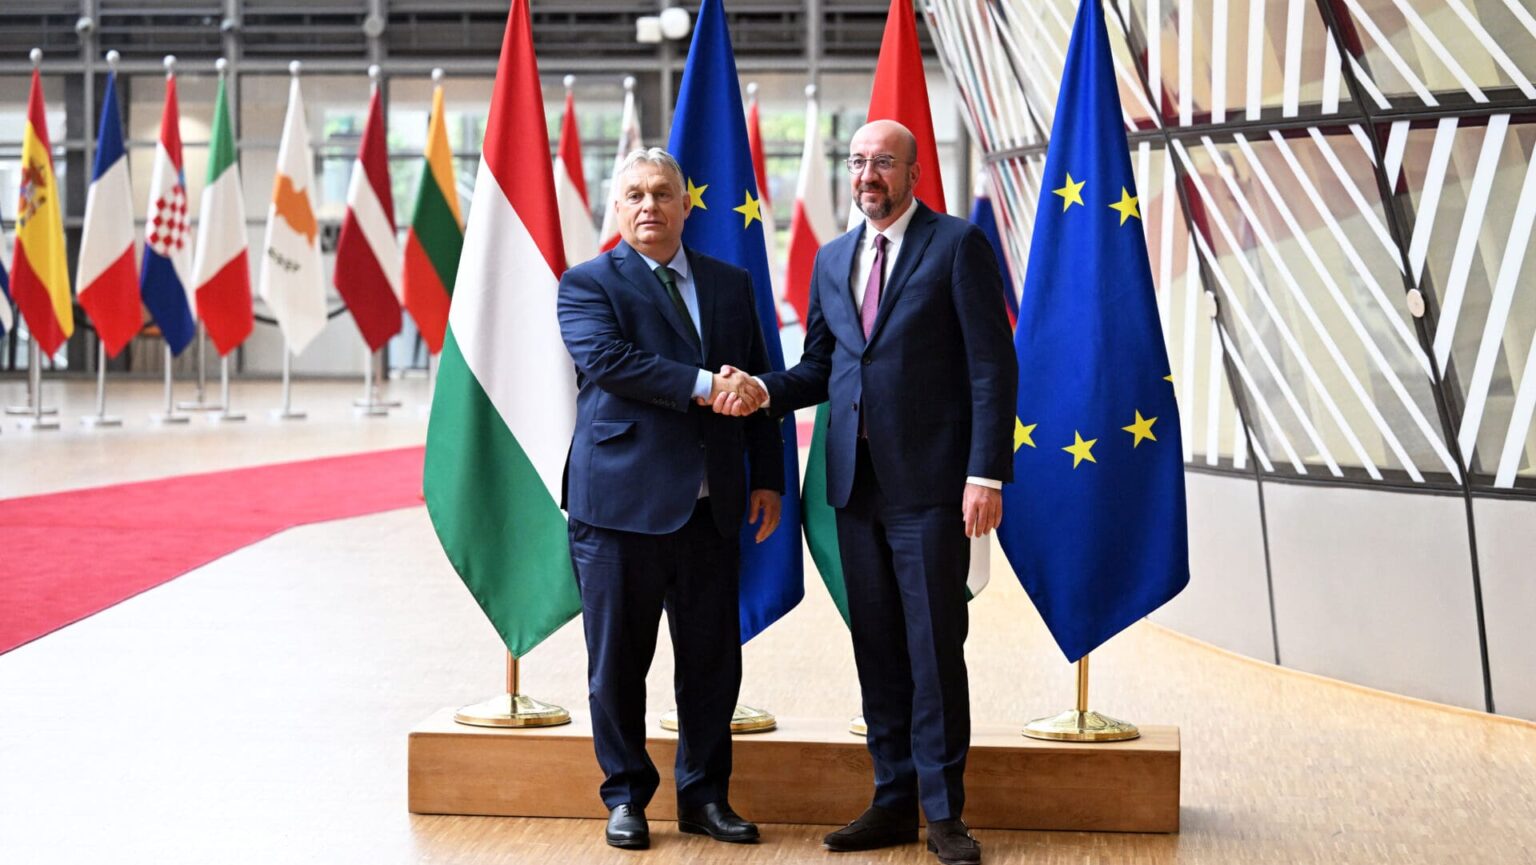 PM Orbán: ‘Let’s make Europe competitive again!’